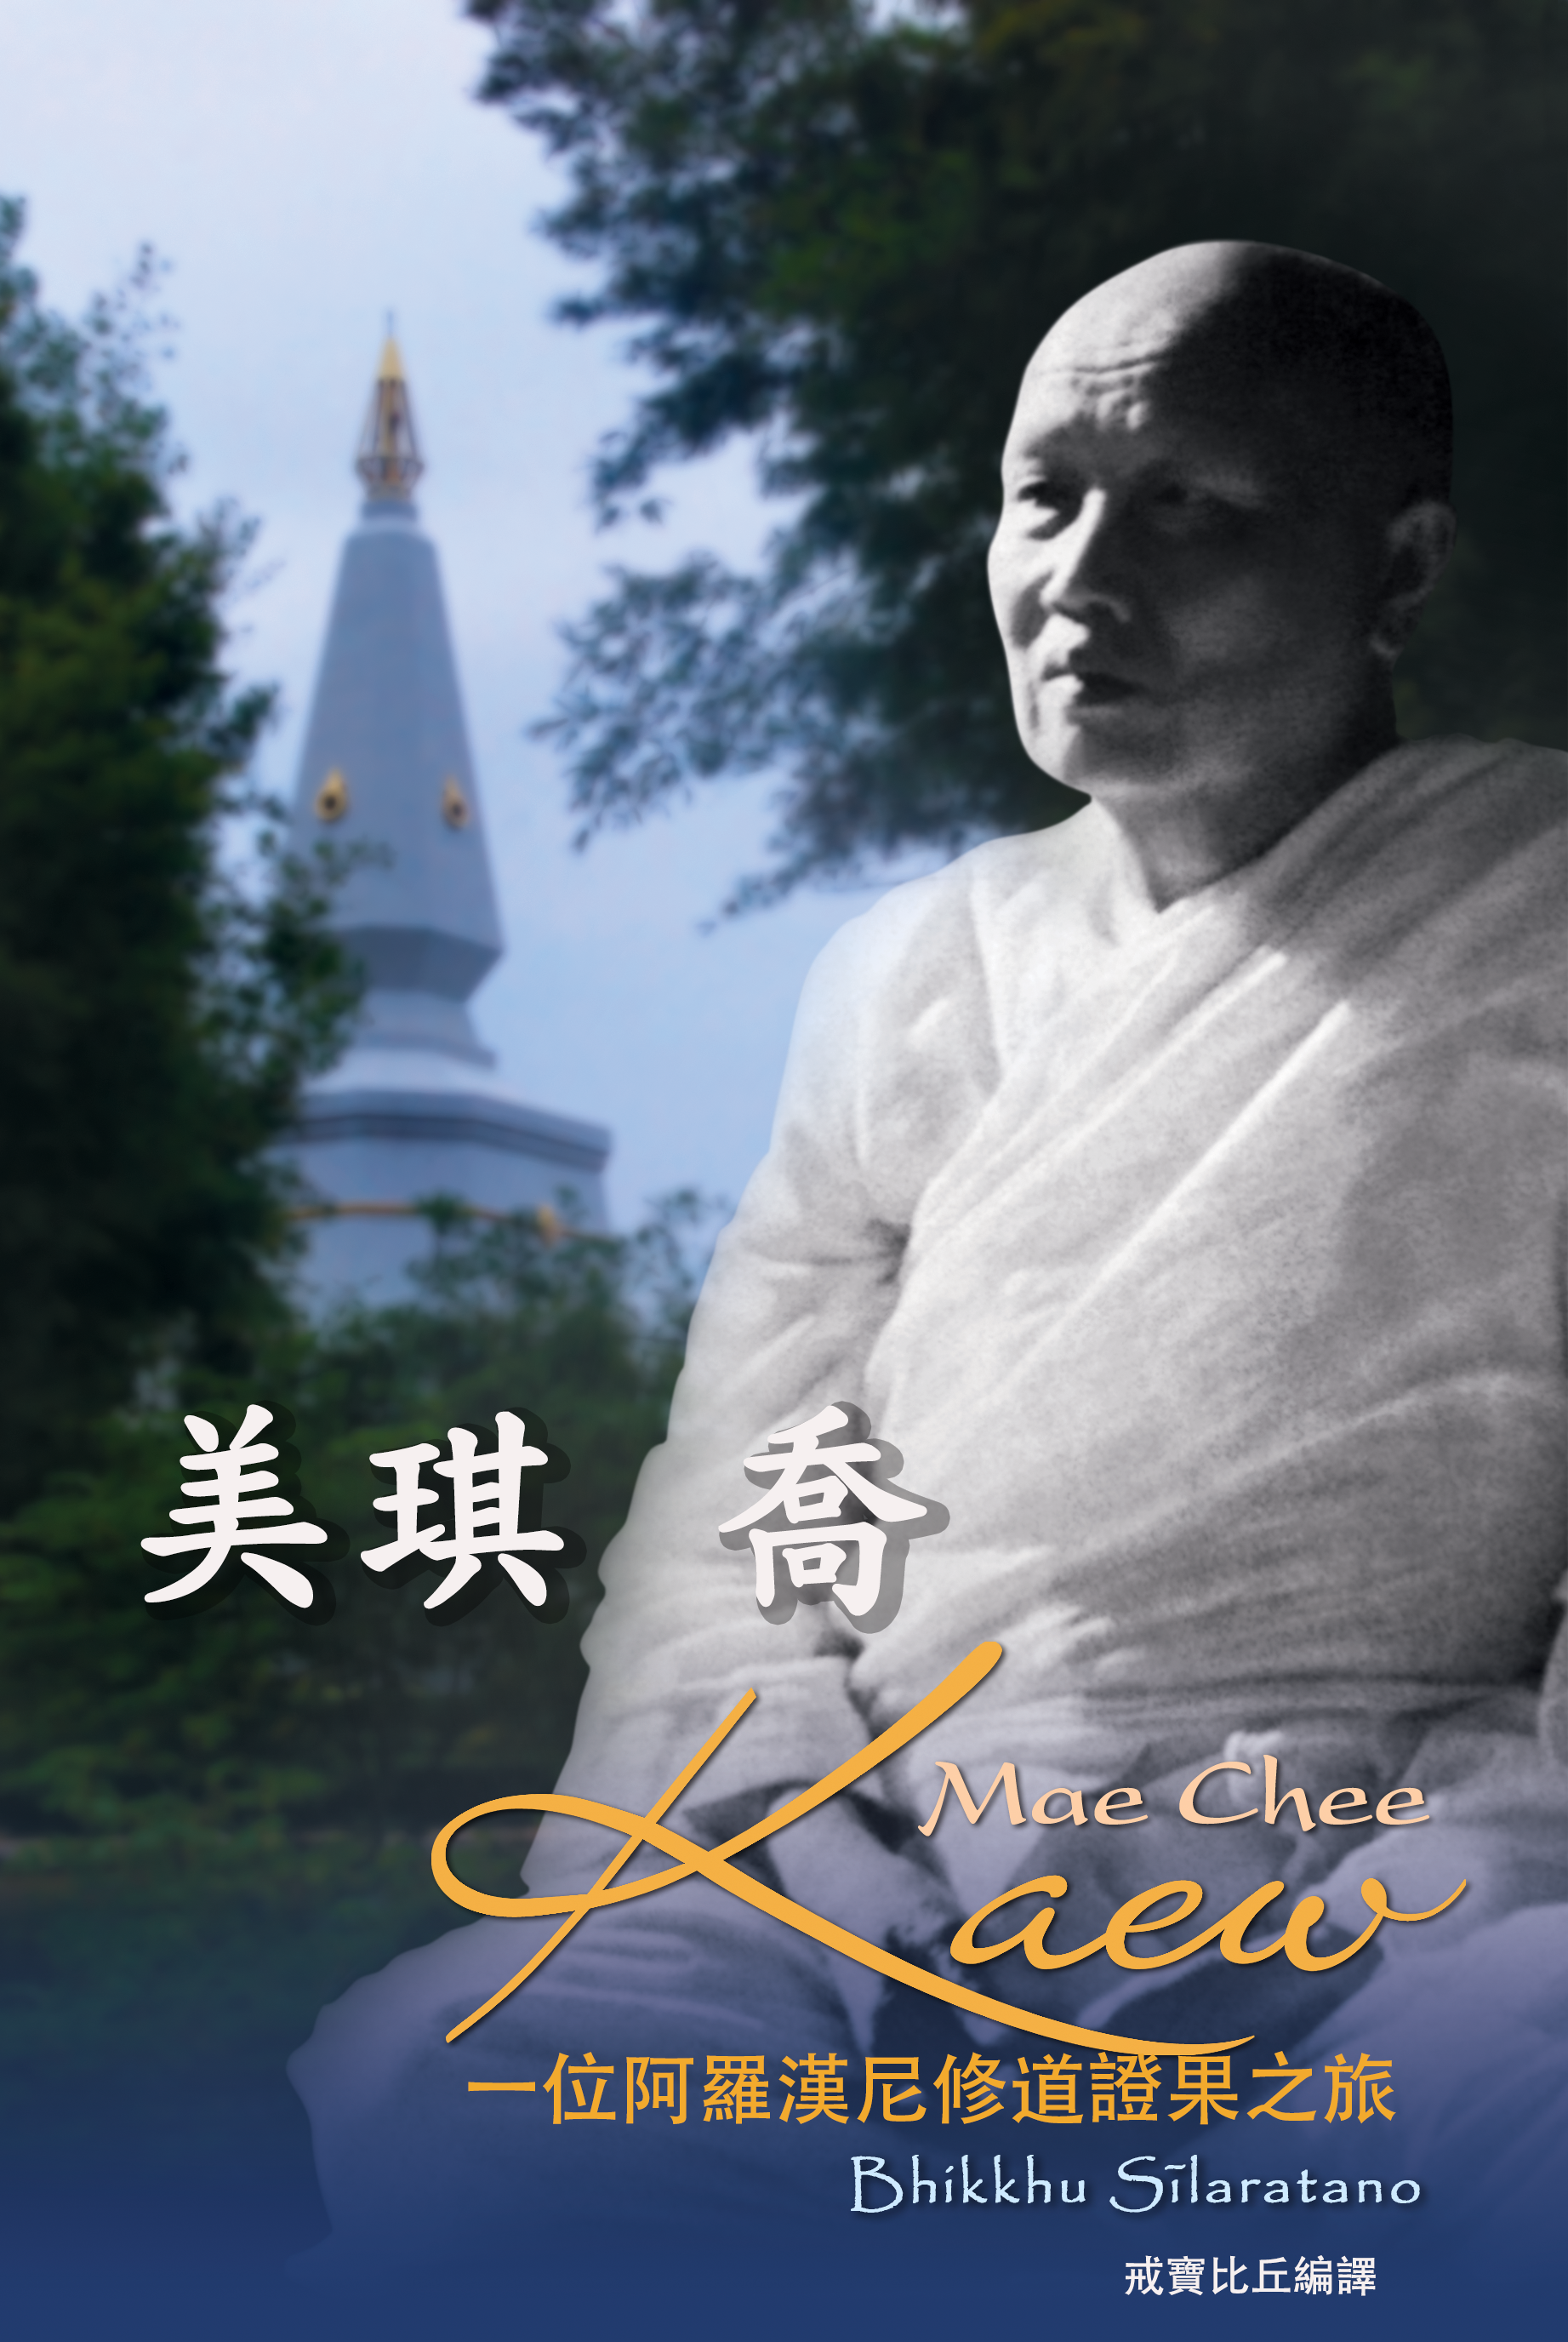 Cover of "Mae Chee Kaew"